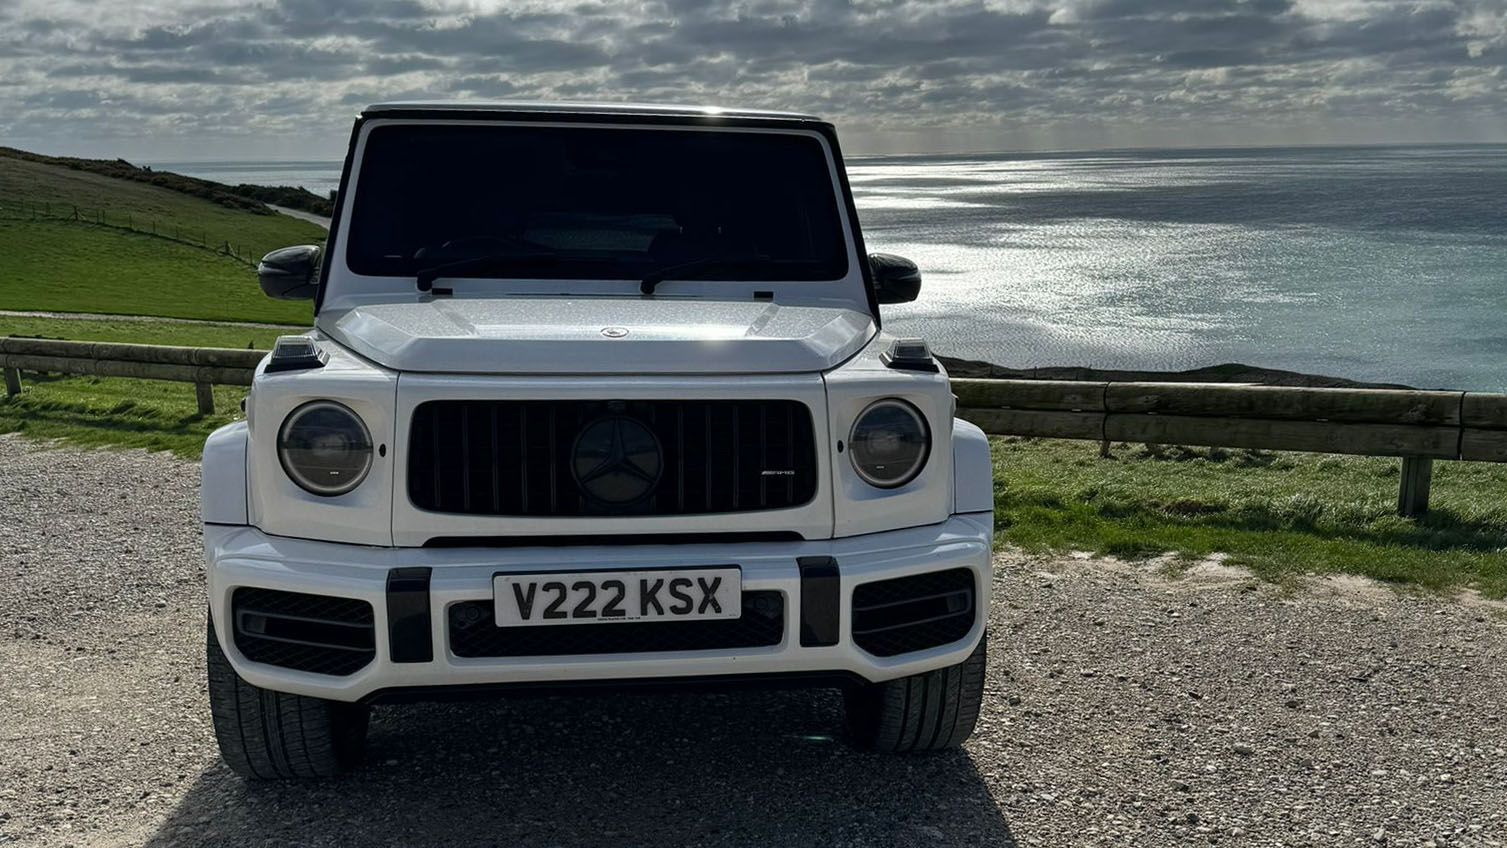 Full front view of White Mercedes G-Wagon